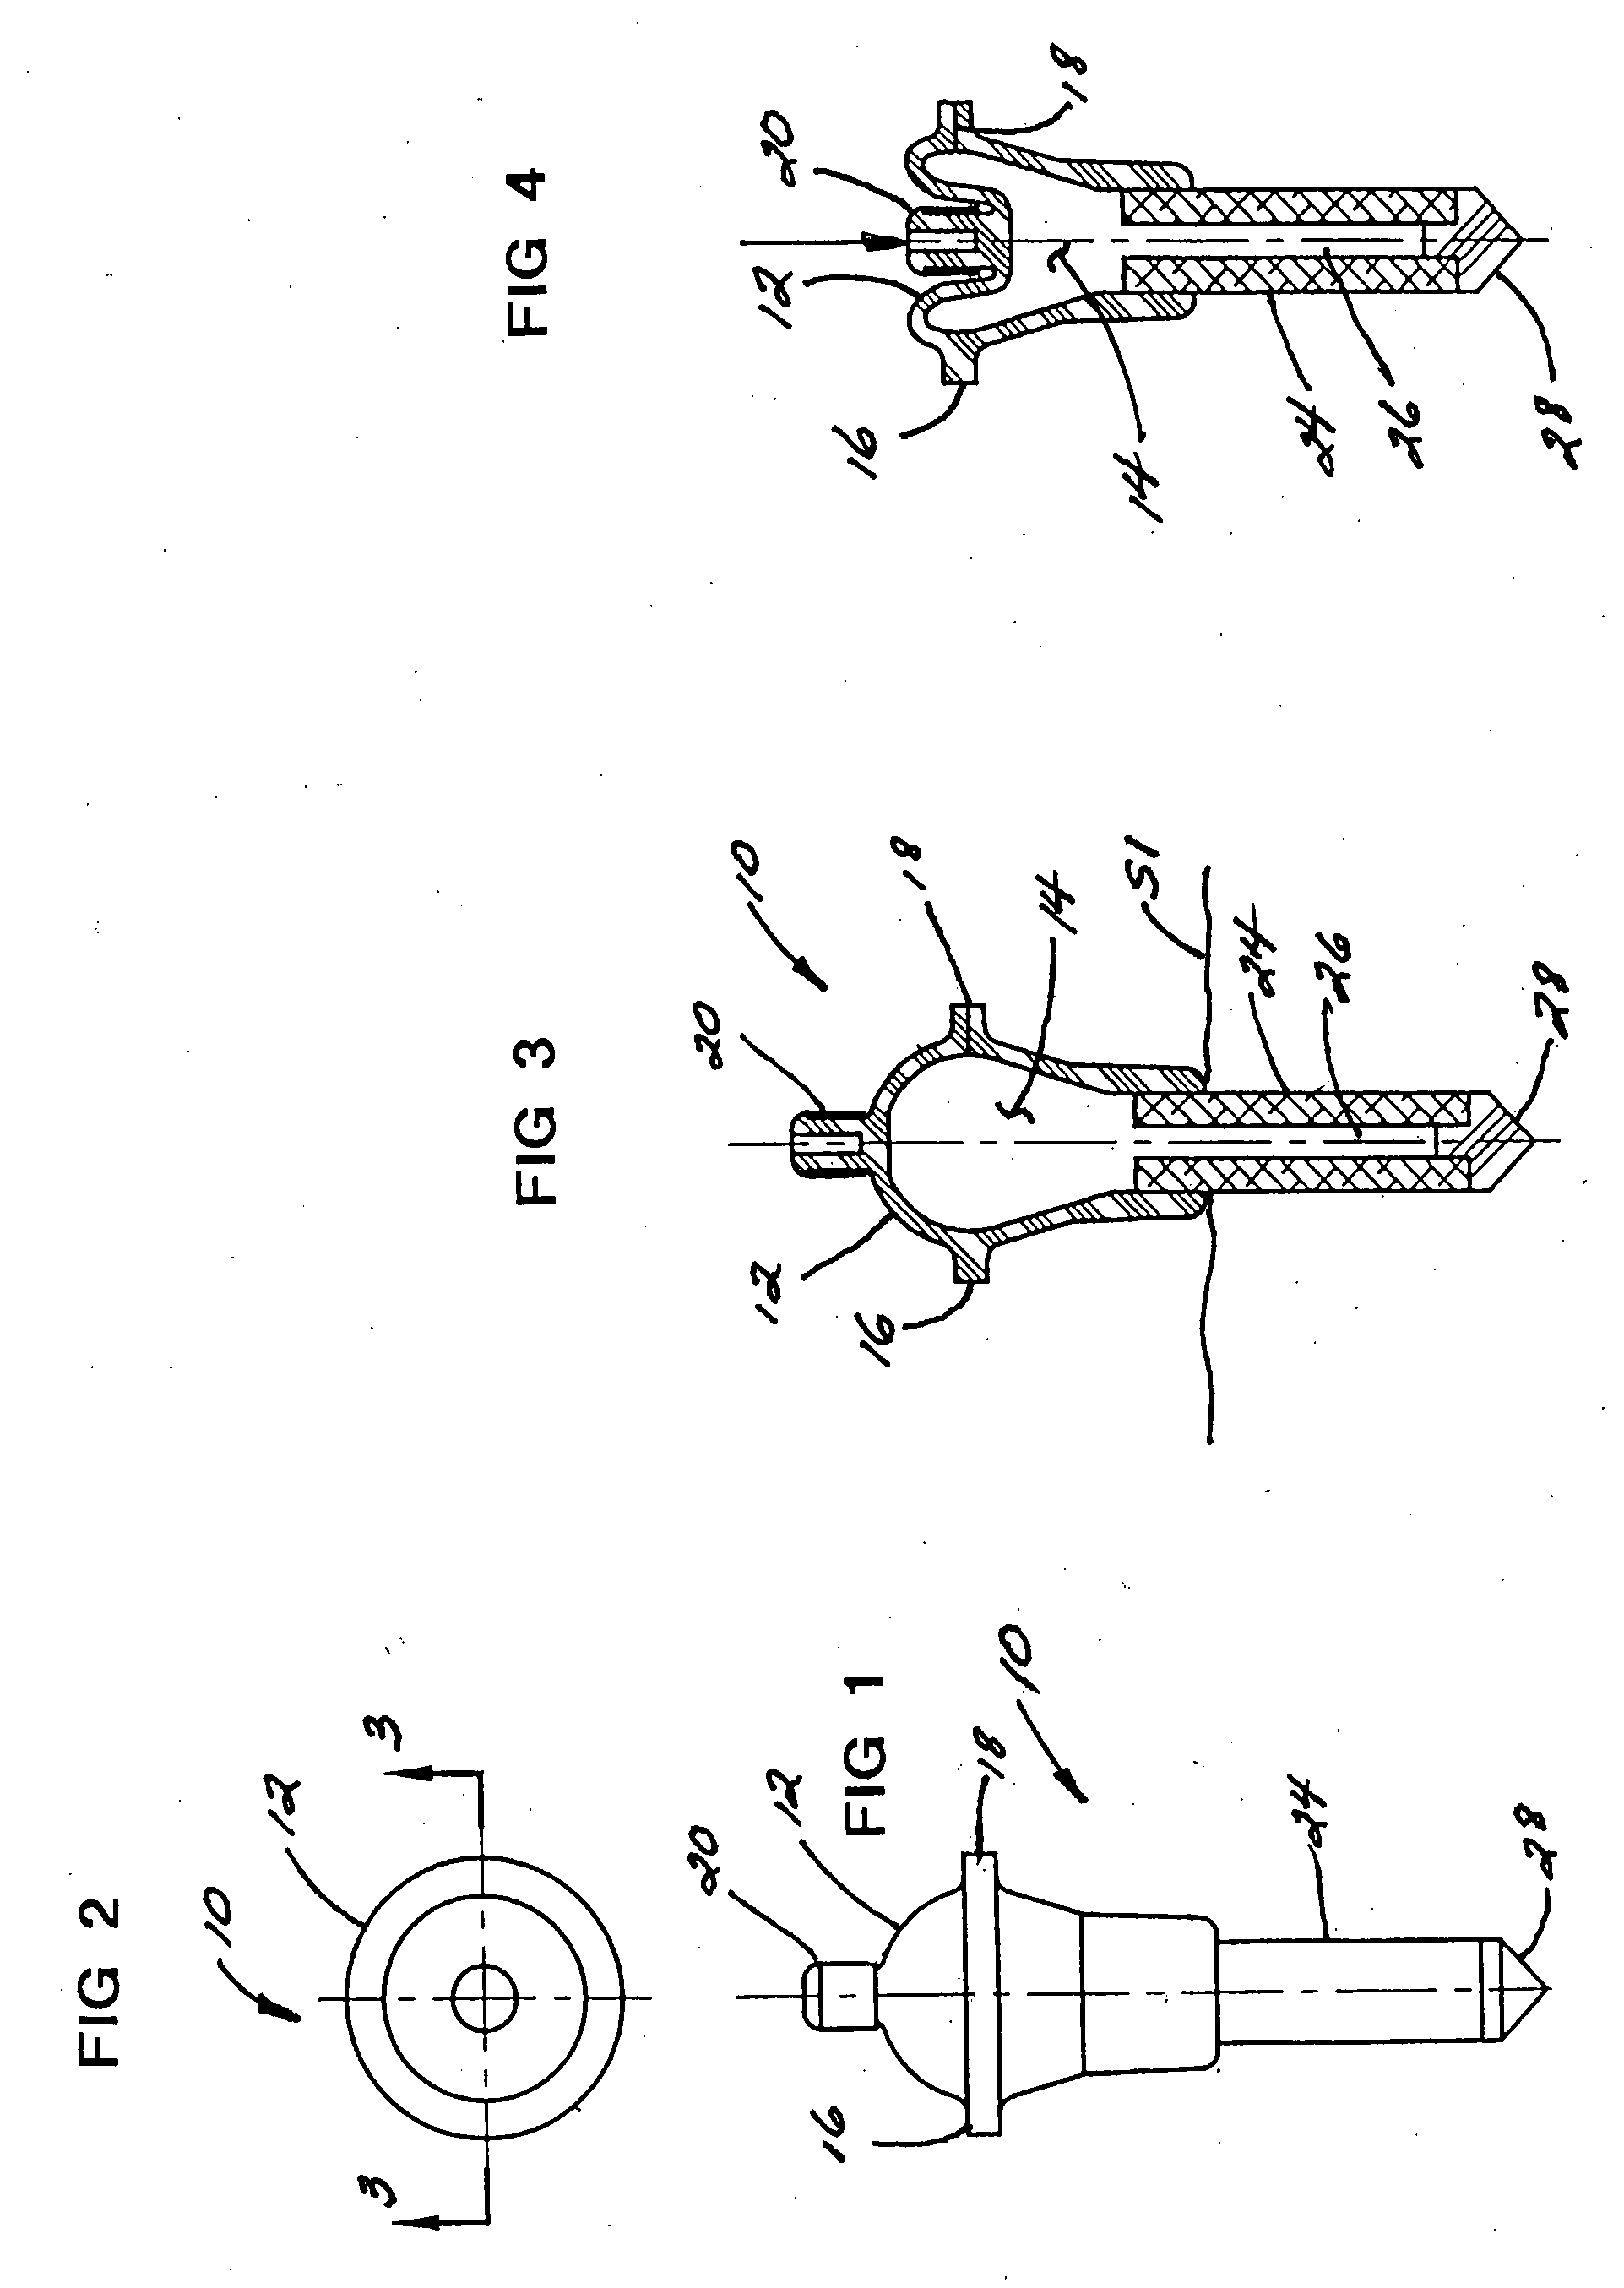 Apparatus for monitoring and regulating soil moisture